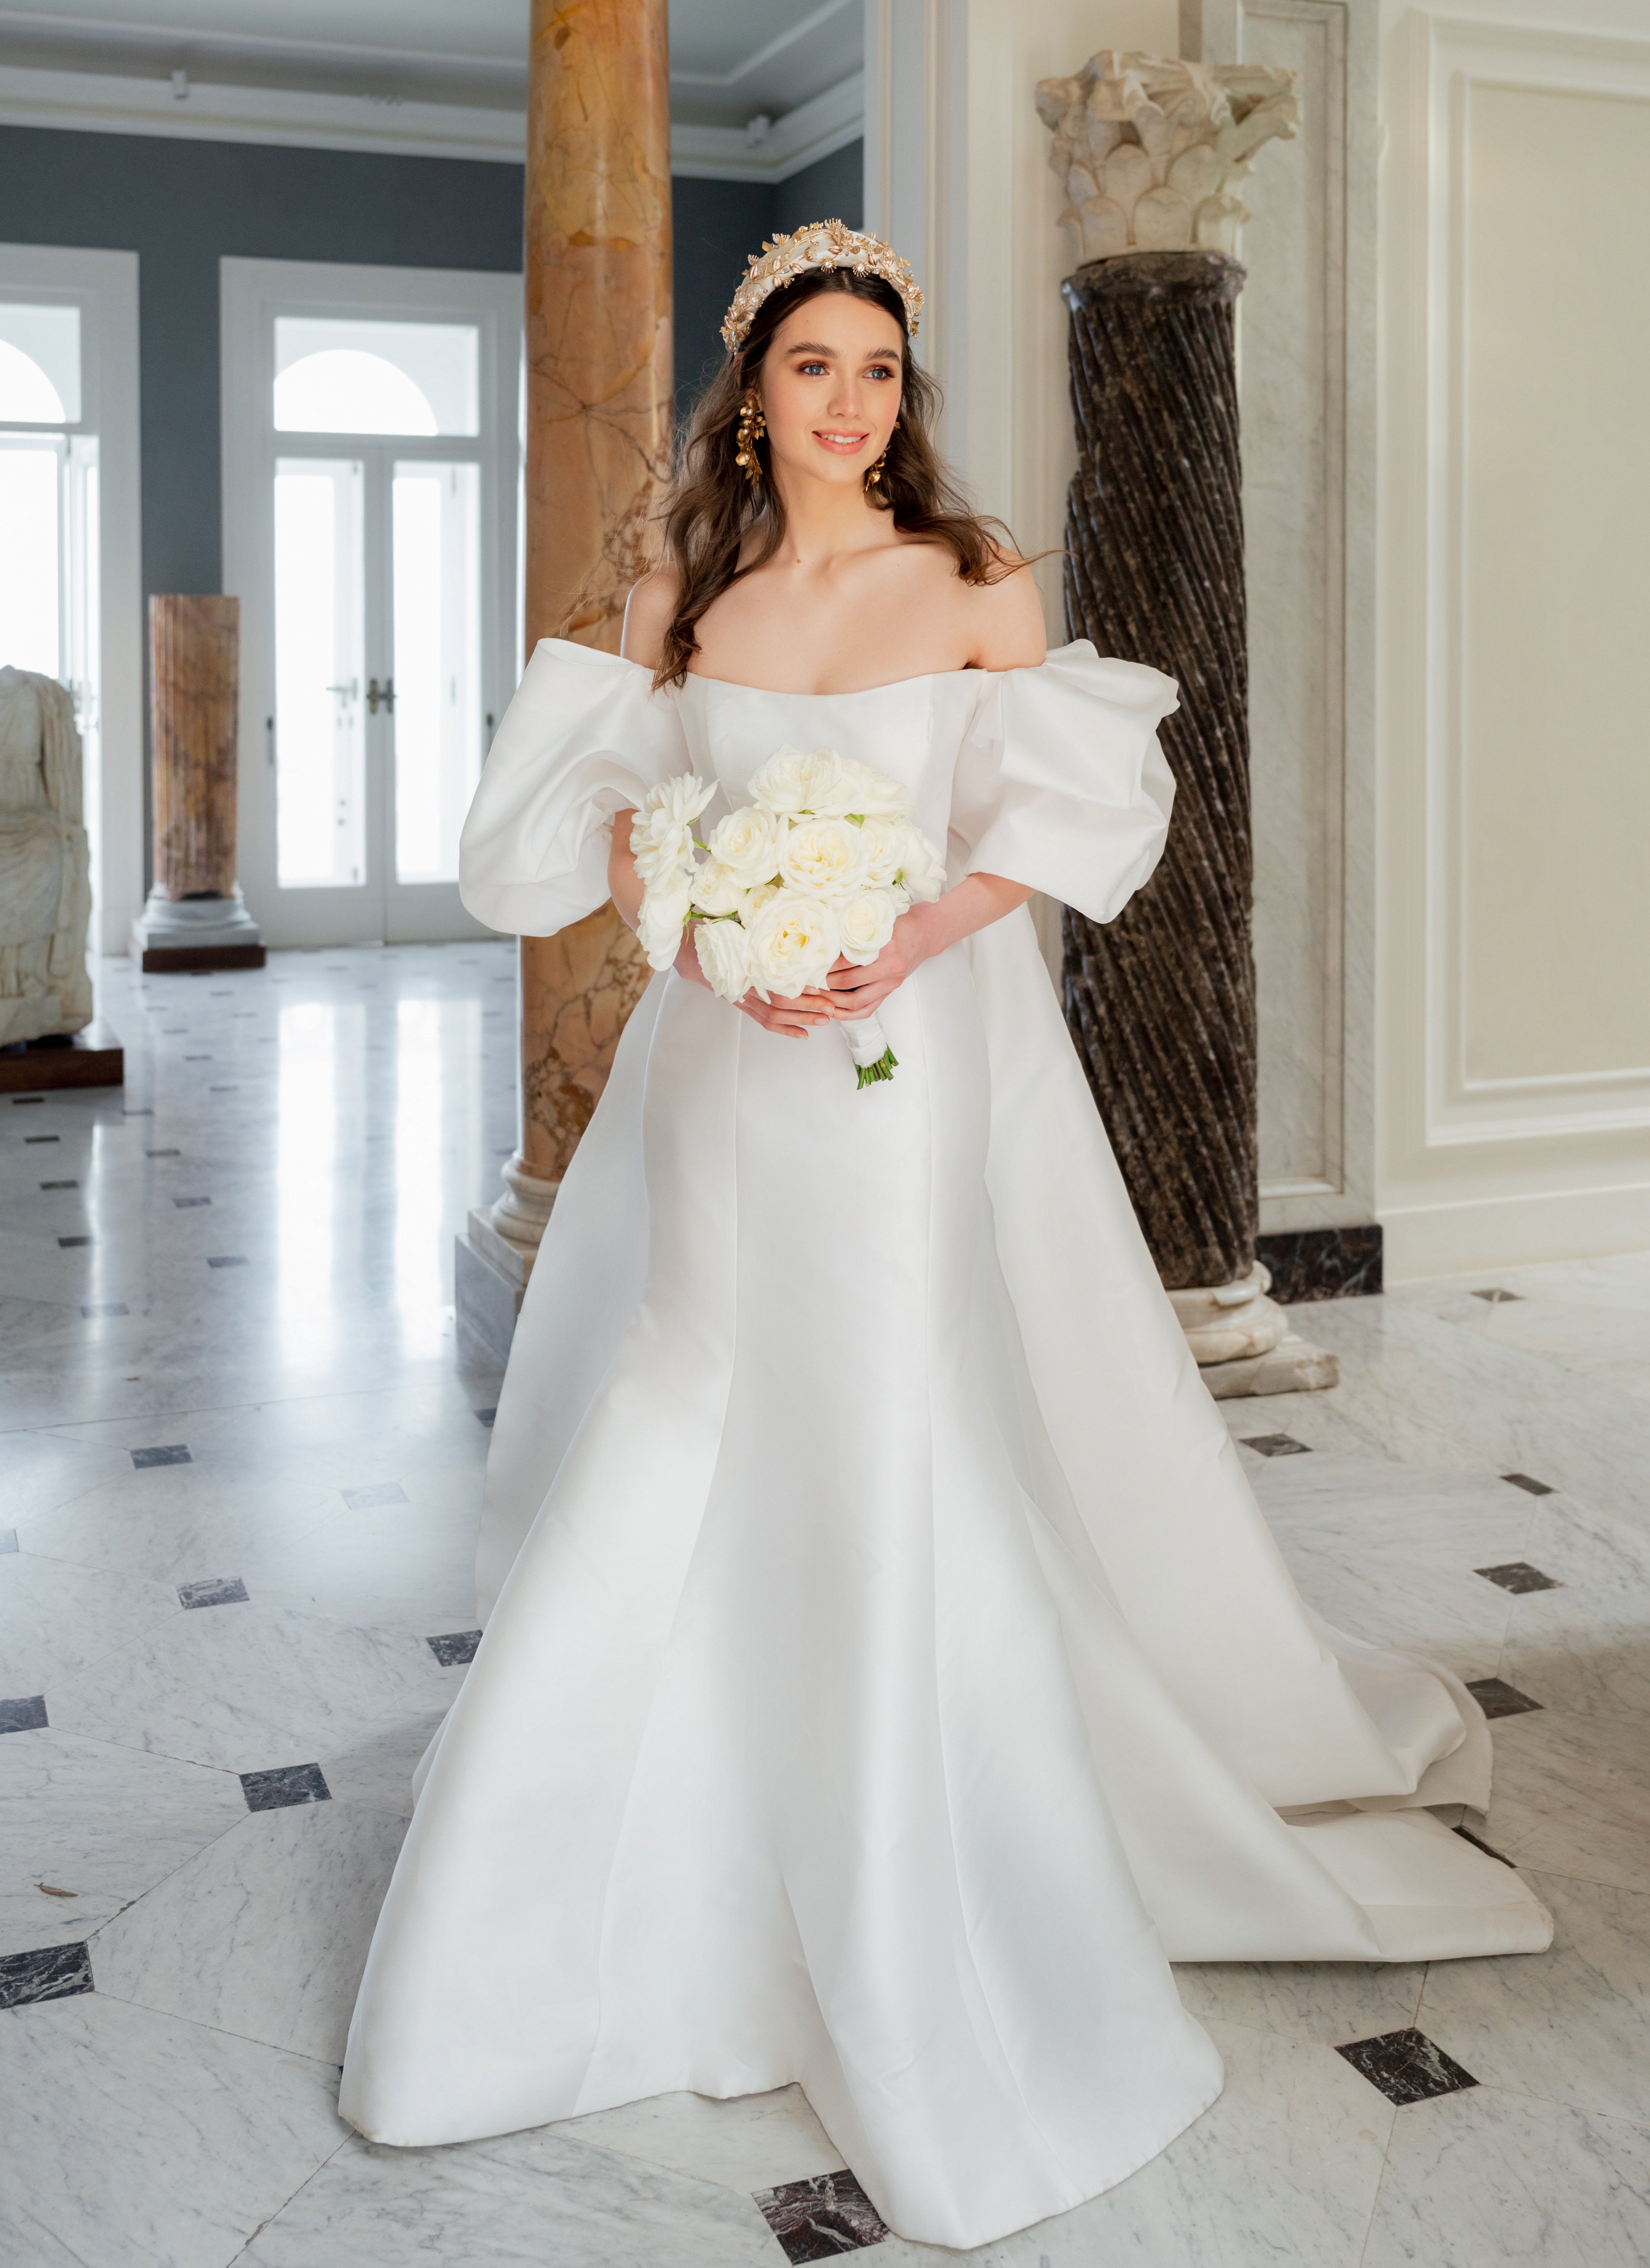 A bride wears a Monique Lhuillier gown and holds a bouquet of white roses to meet her groom.